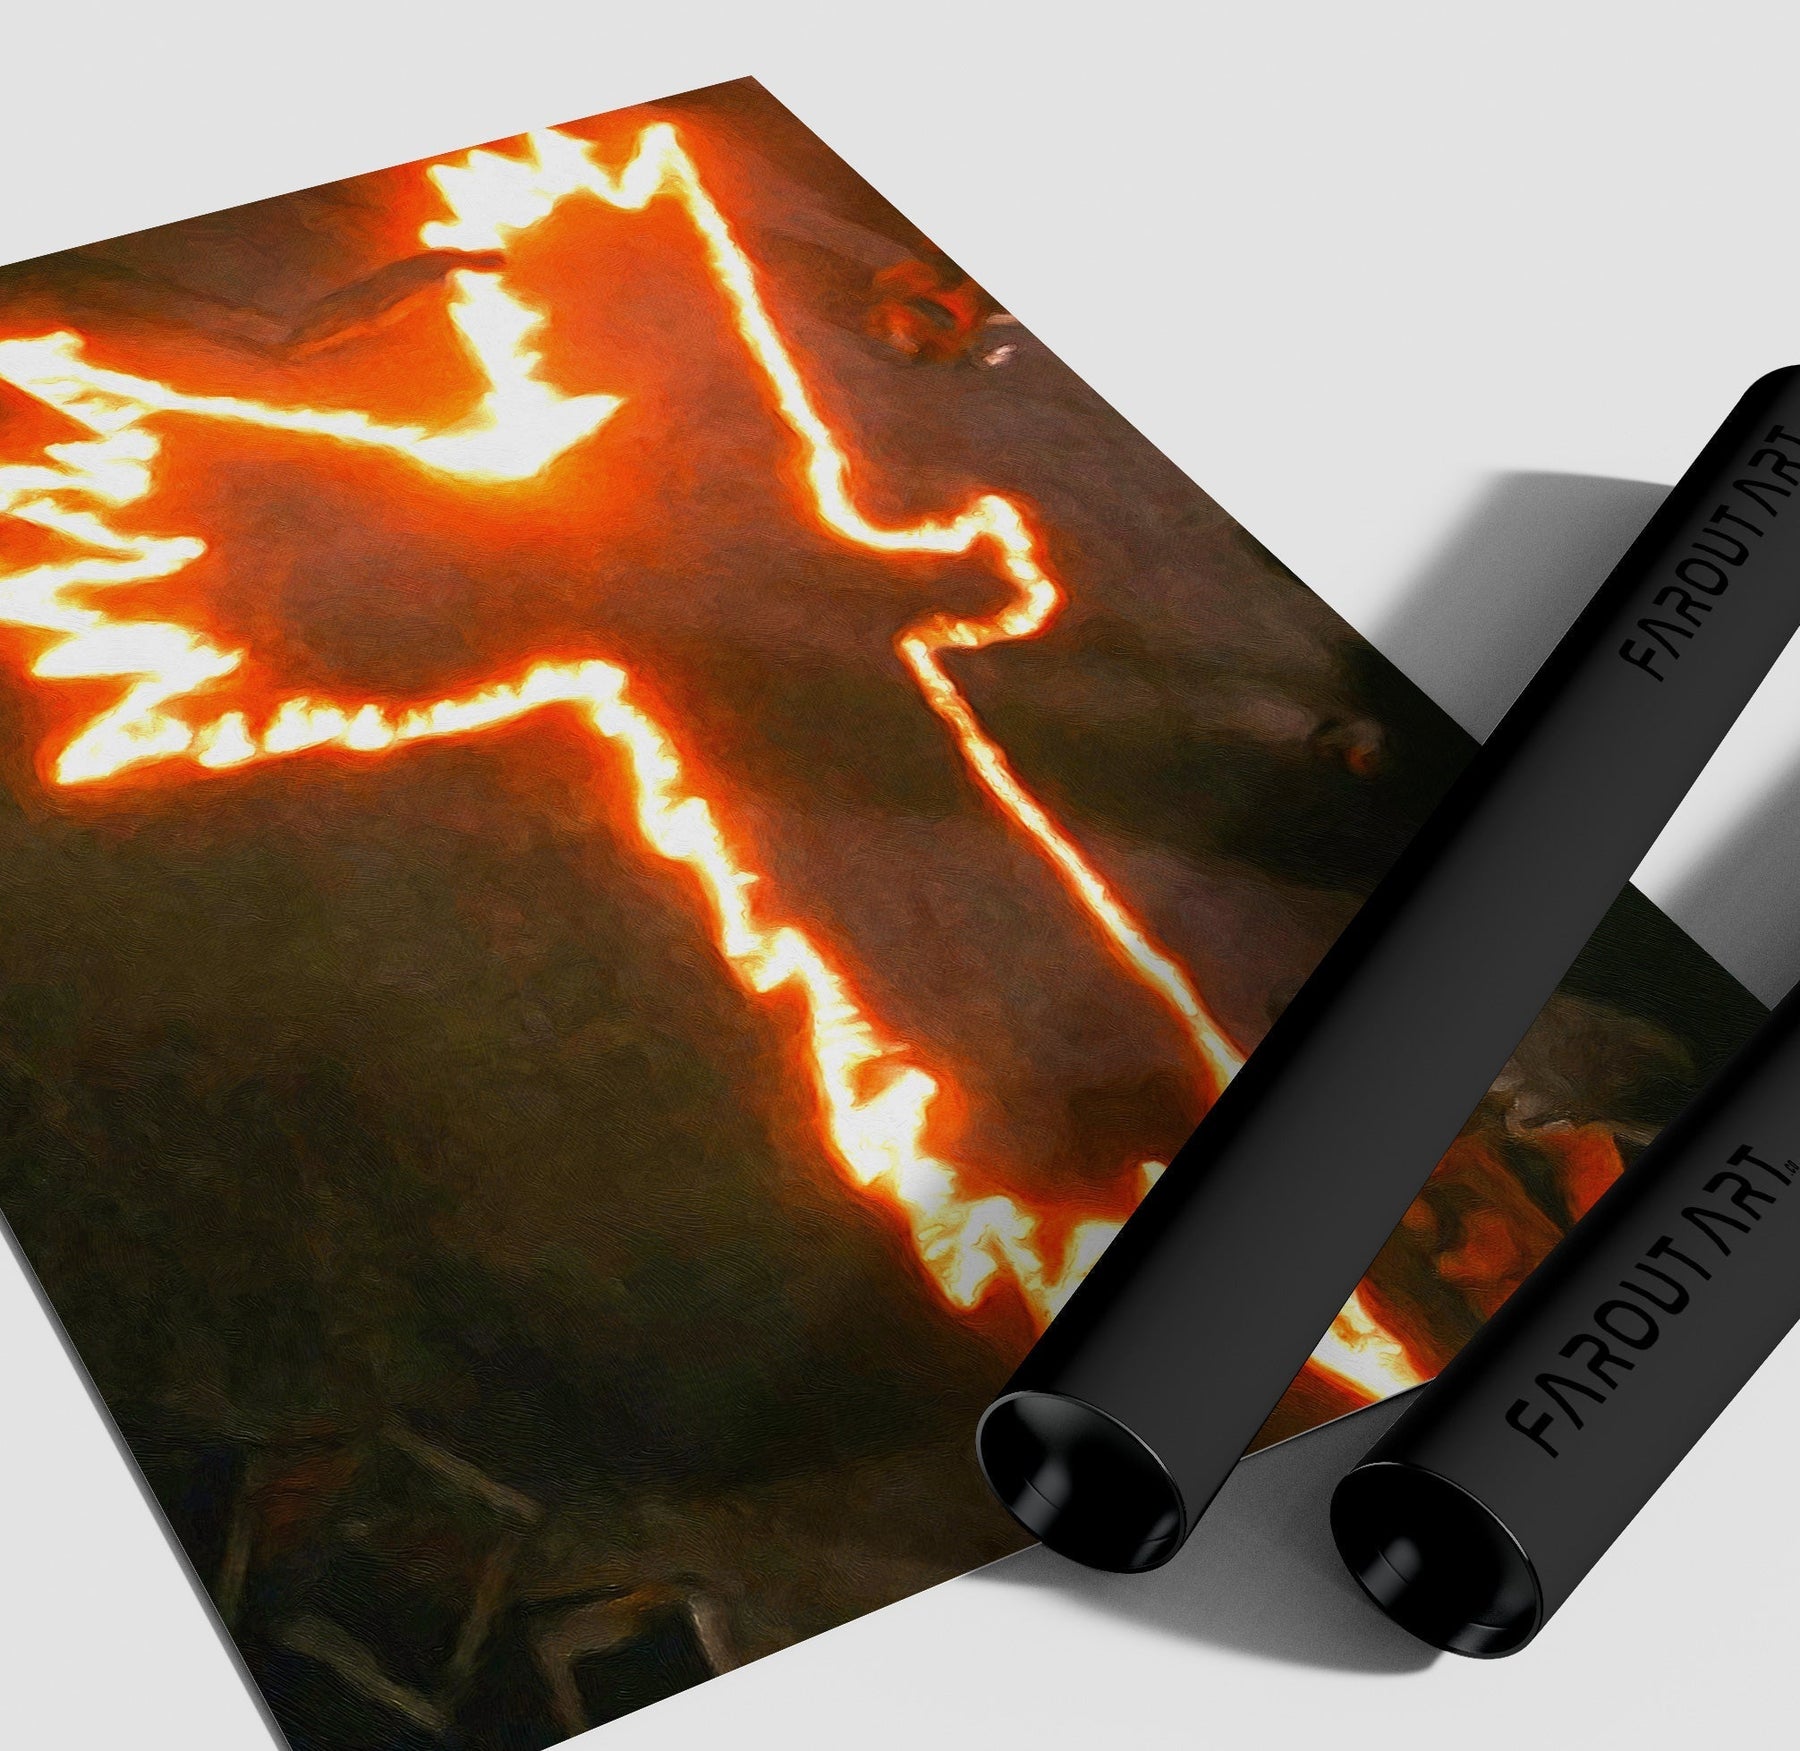 The Crow In Flames Wall Art